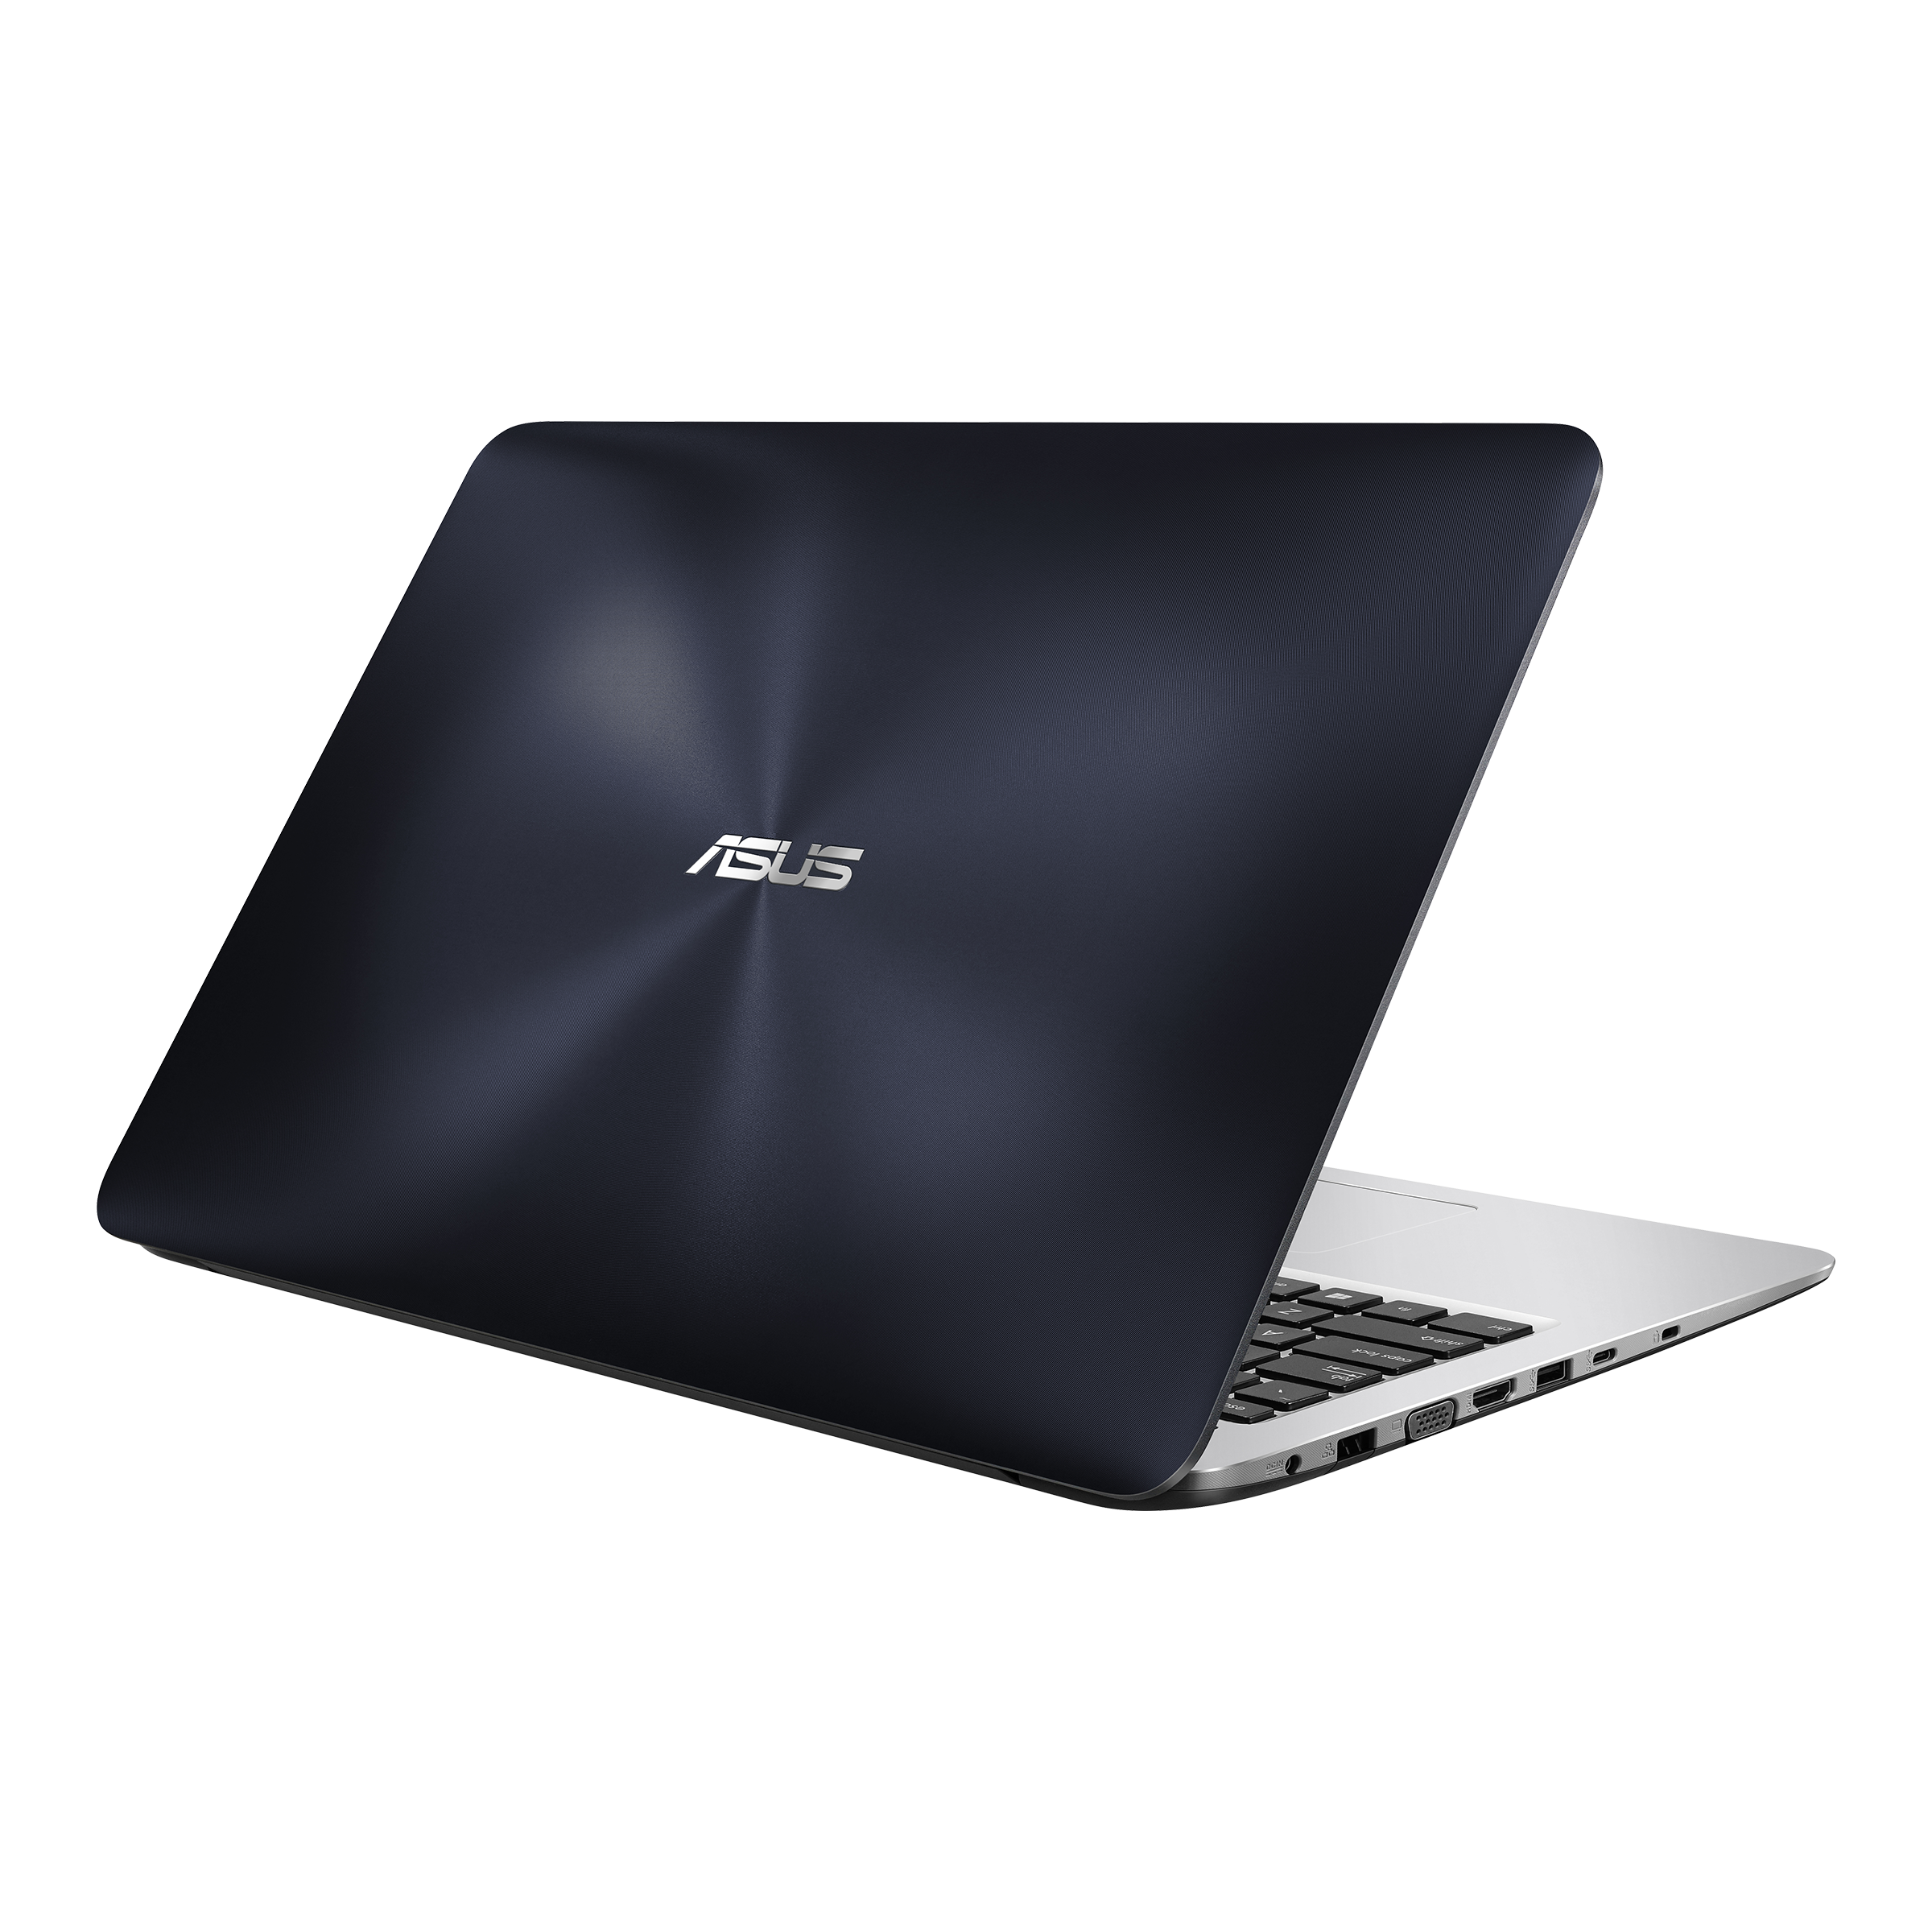 ASUS X556｜Laptops For Home｜ASUS Global